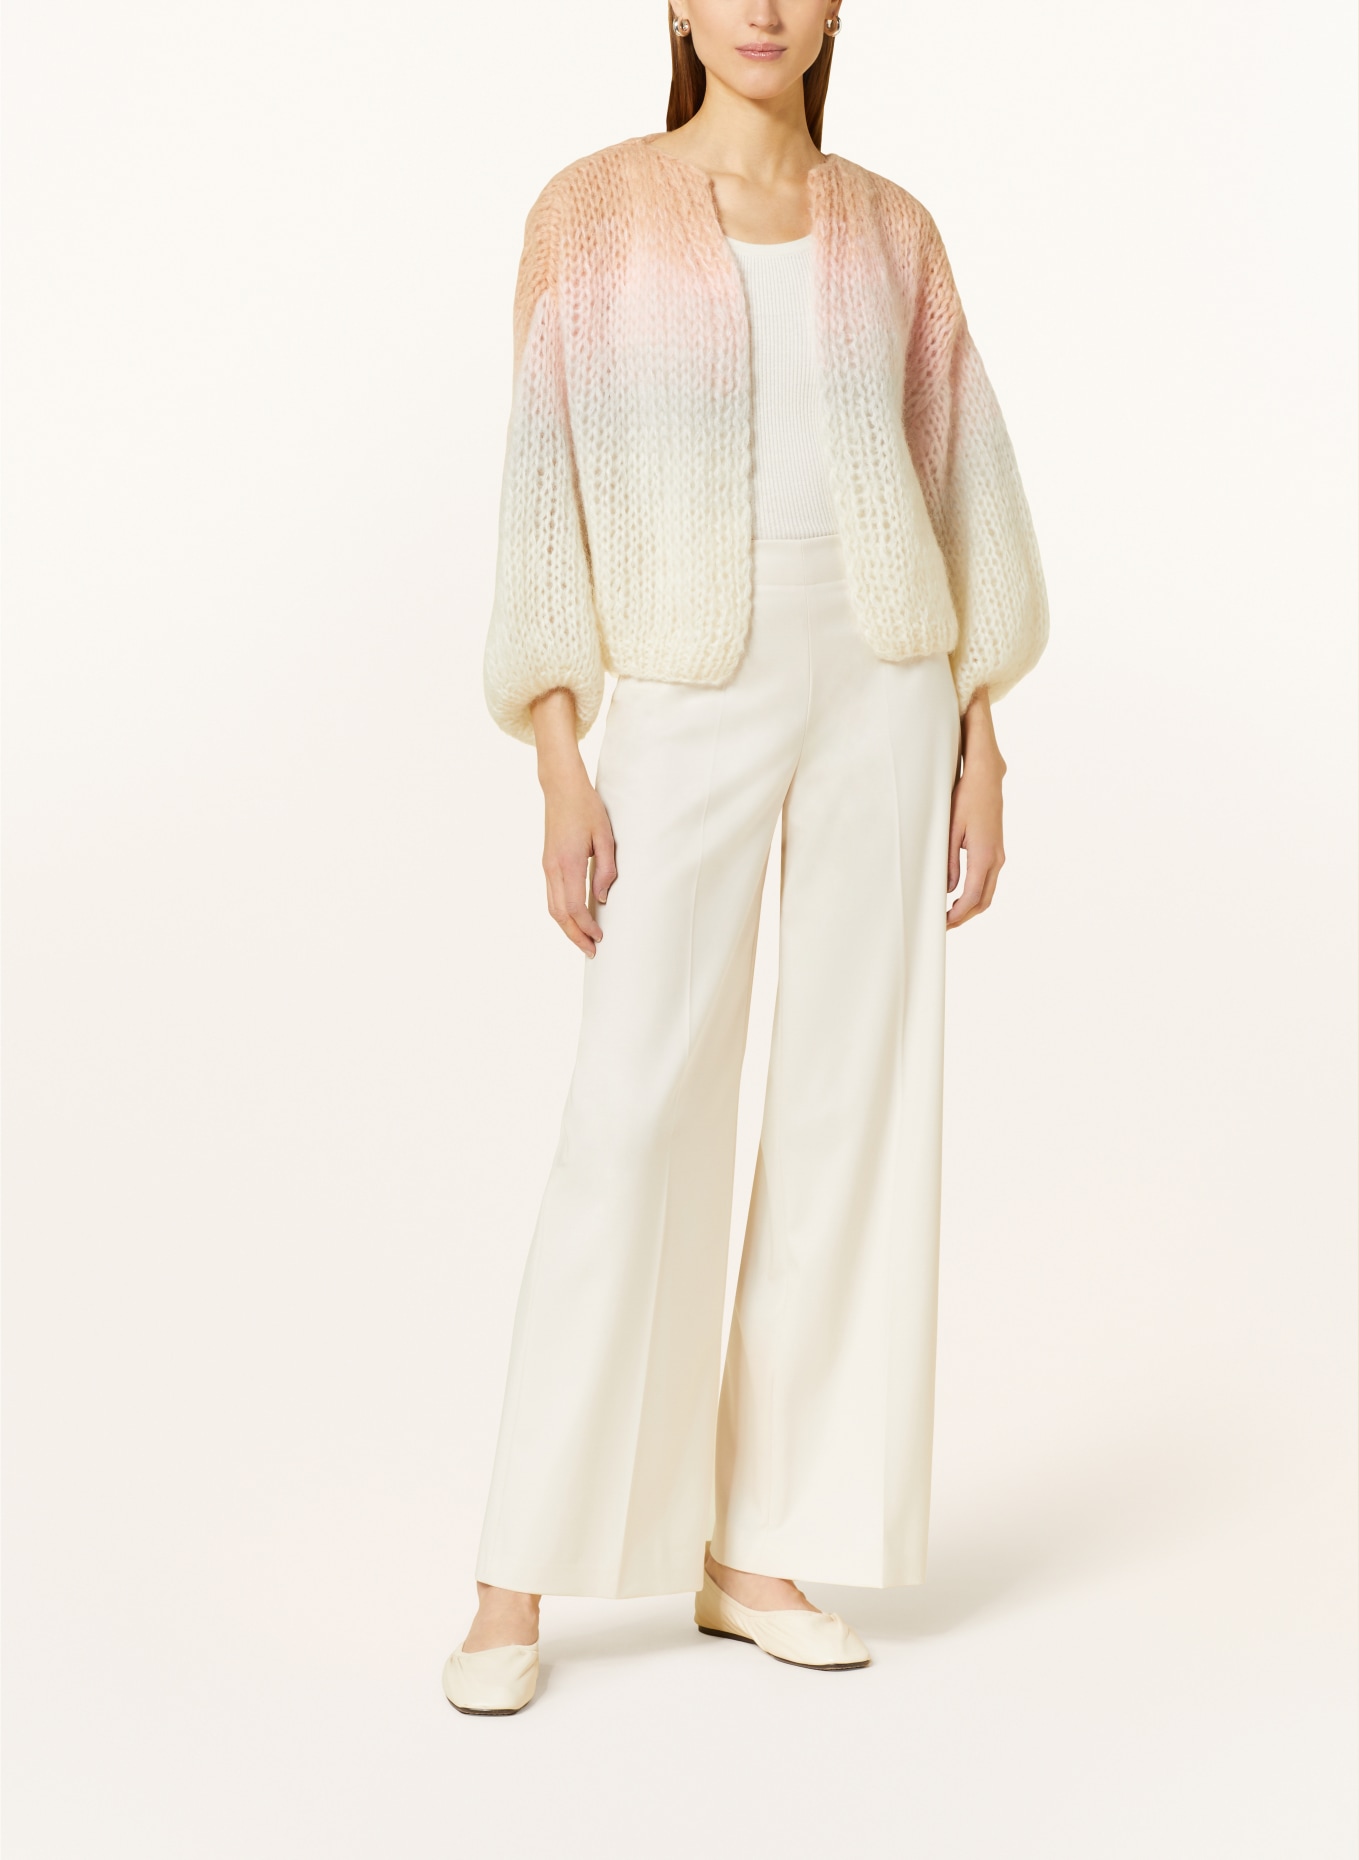 MAIAMI Oversized knit cardigan with mohair, Color: CREAM/ LIGHT PINK/ LIGHT GRAY (Image 2)